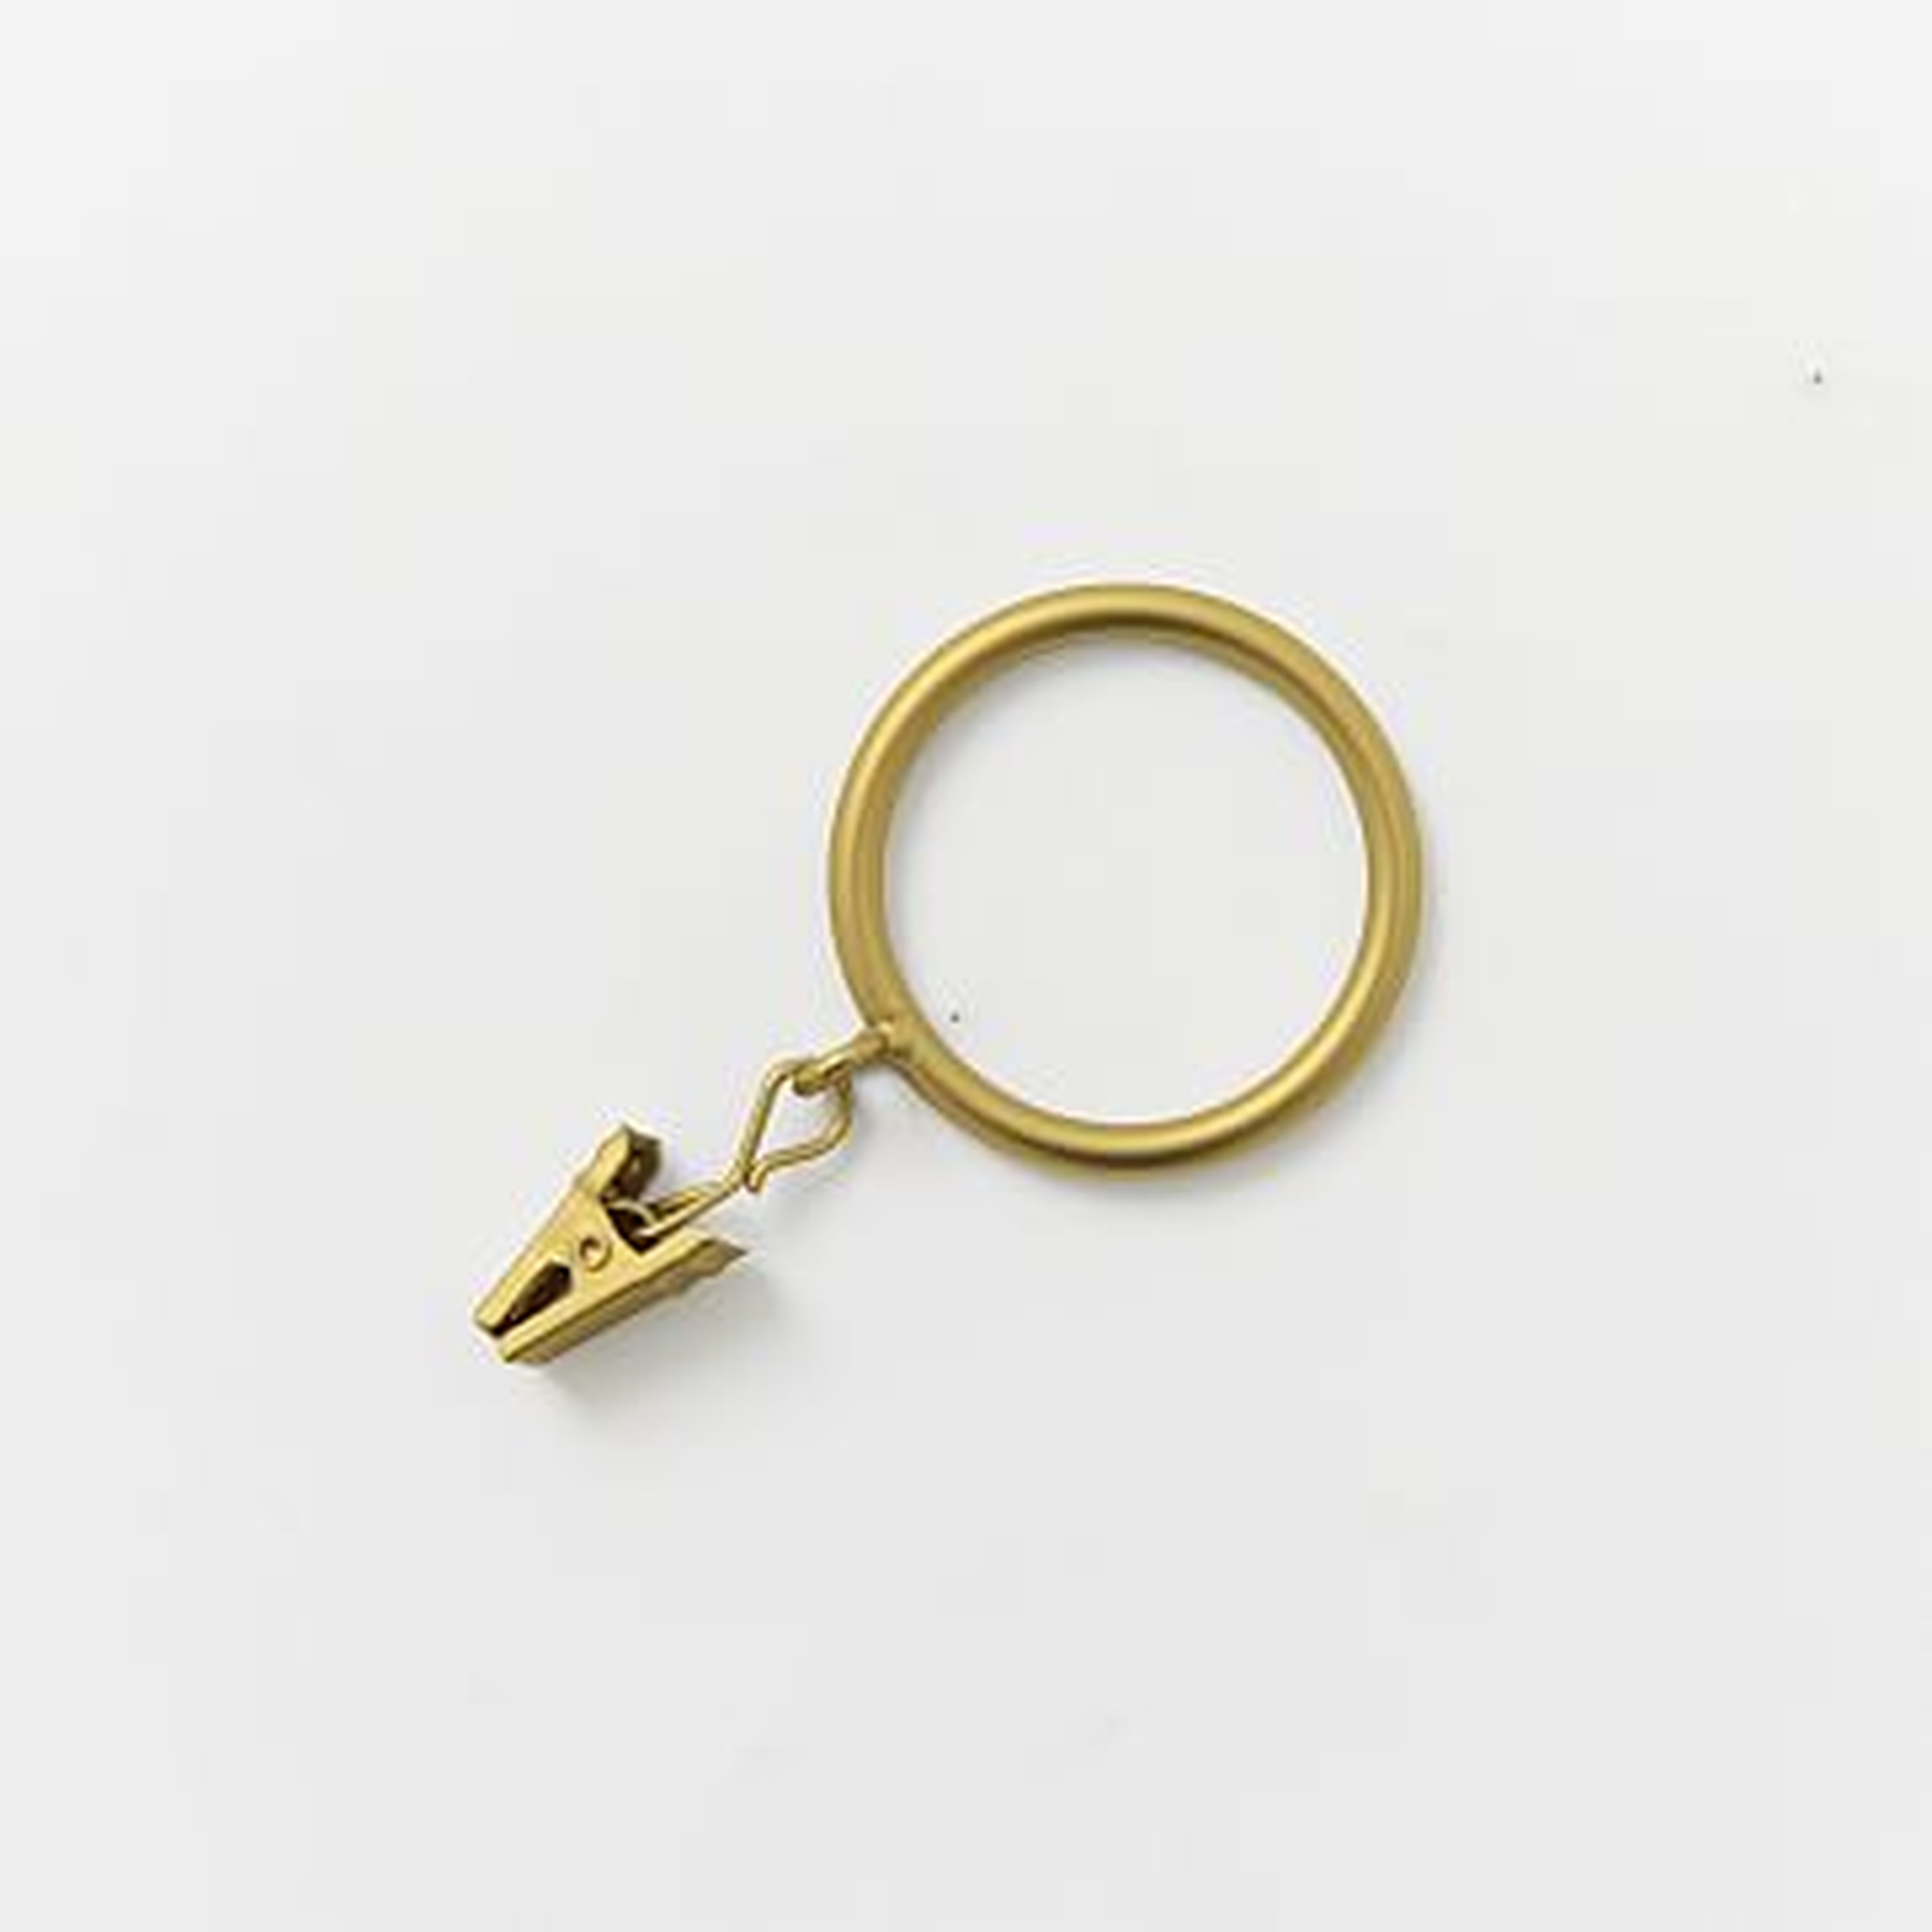 Thin Metal Curtain Ring With Clip, Set of 7, Antique Brass - West Elm